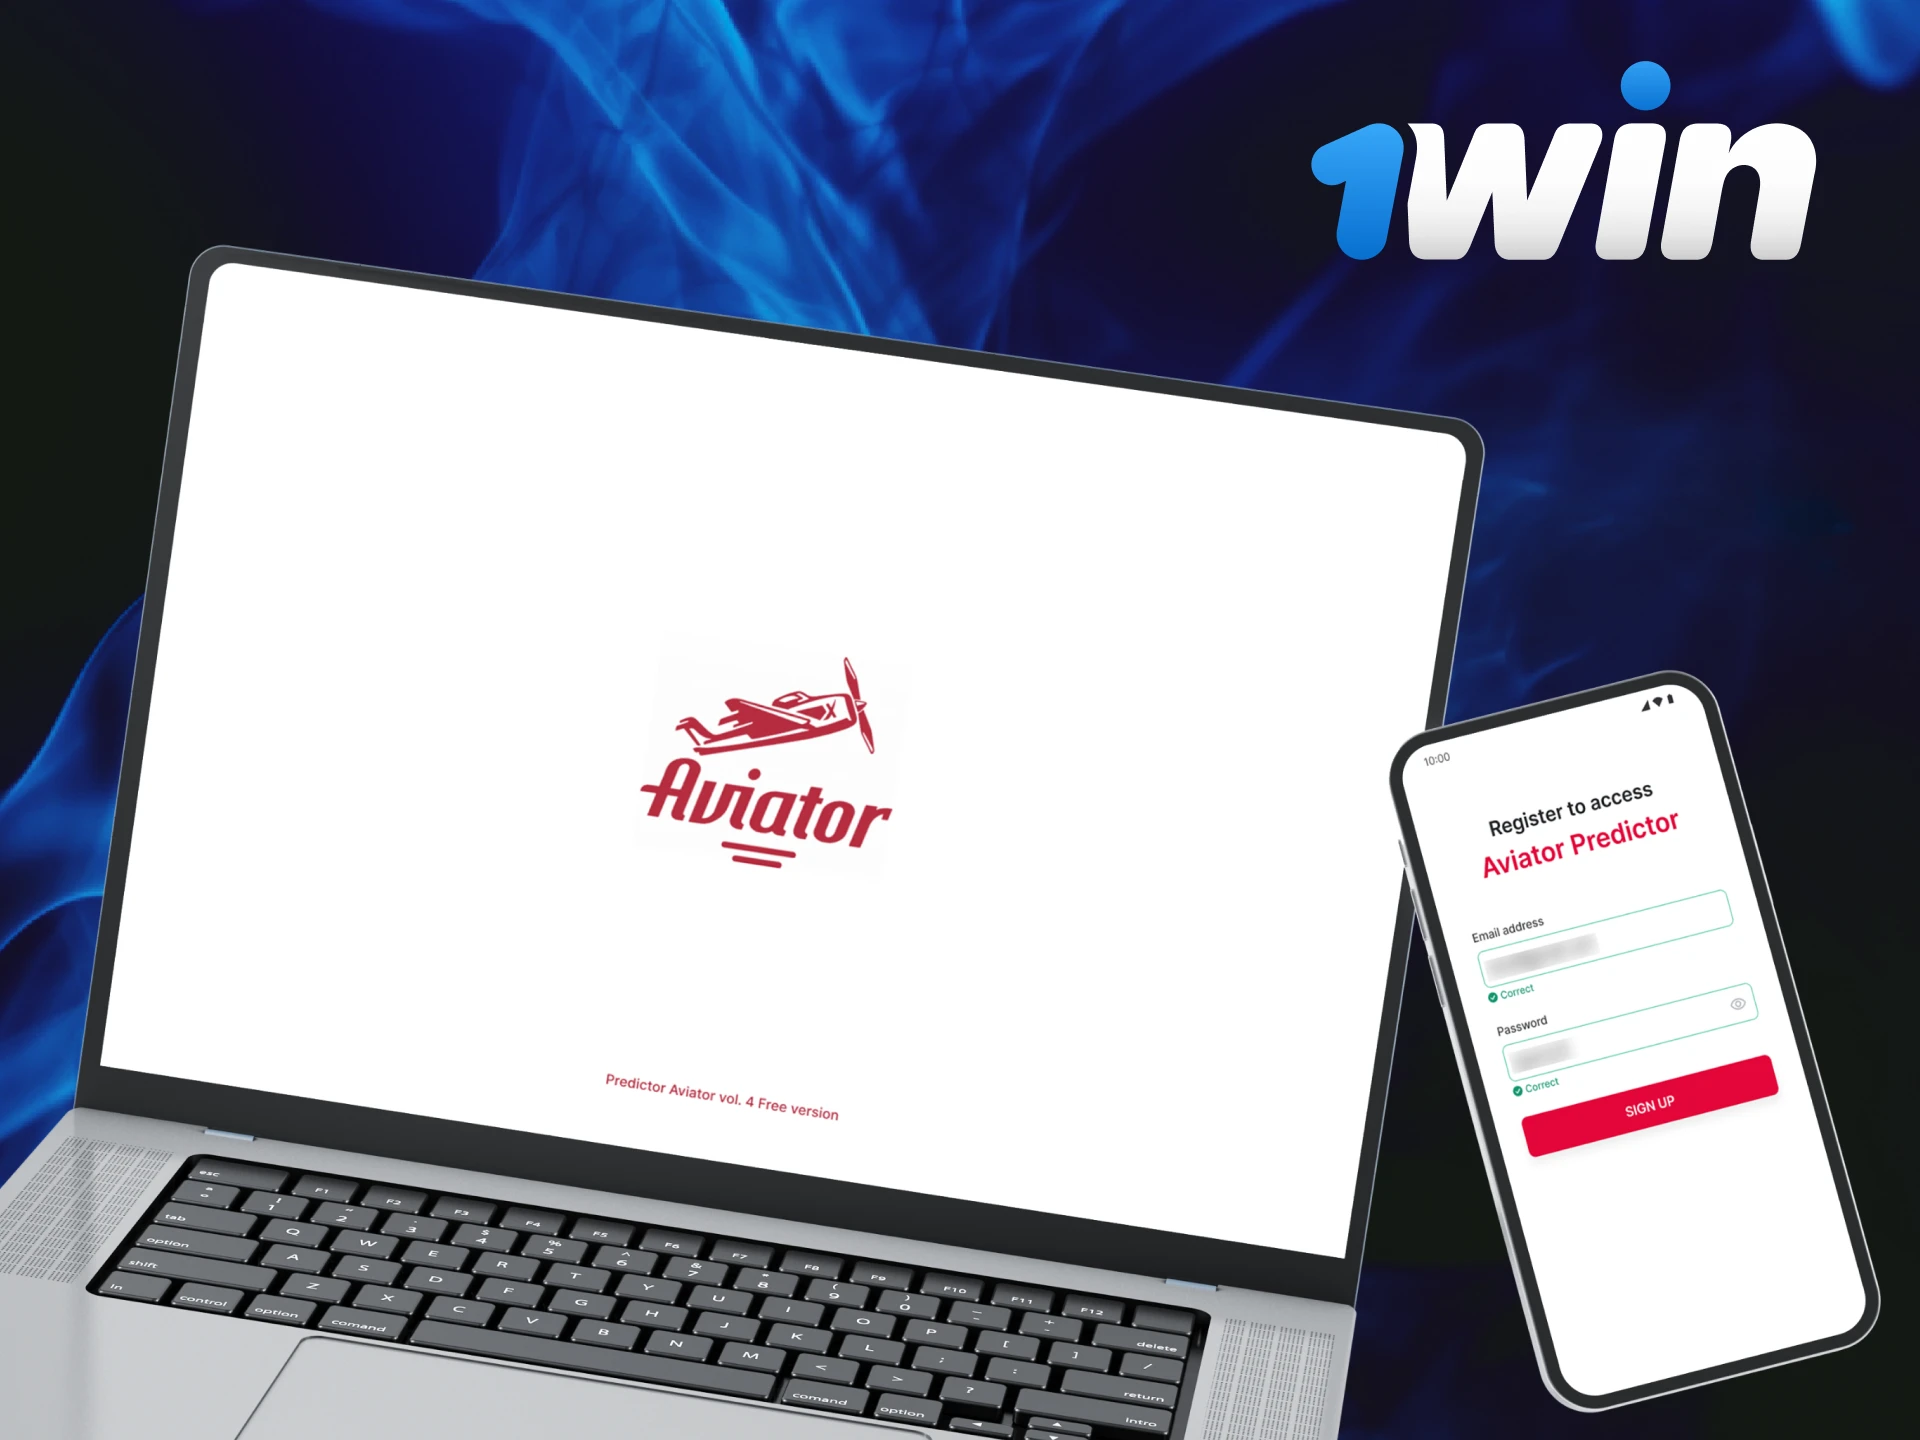 The predictor for Aviator in 1Win casino has a simple interface for users.